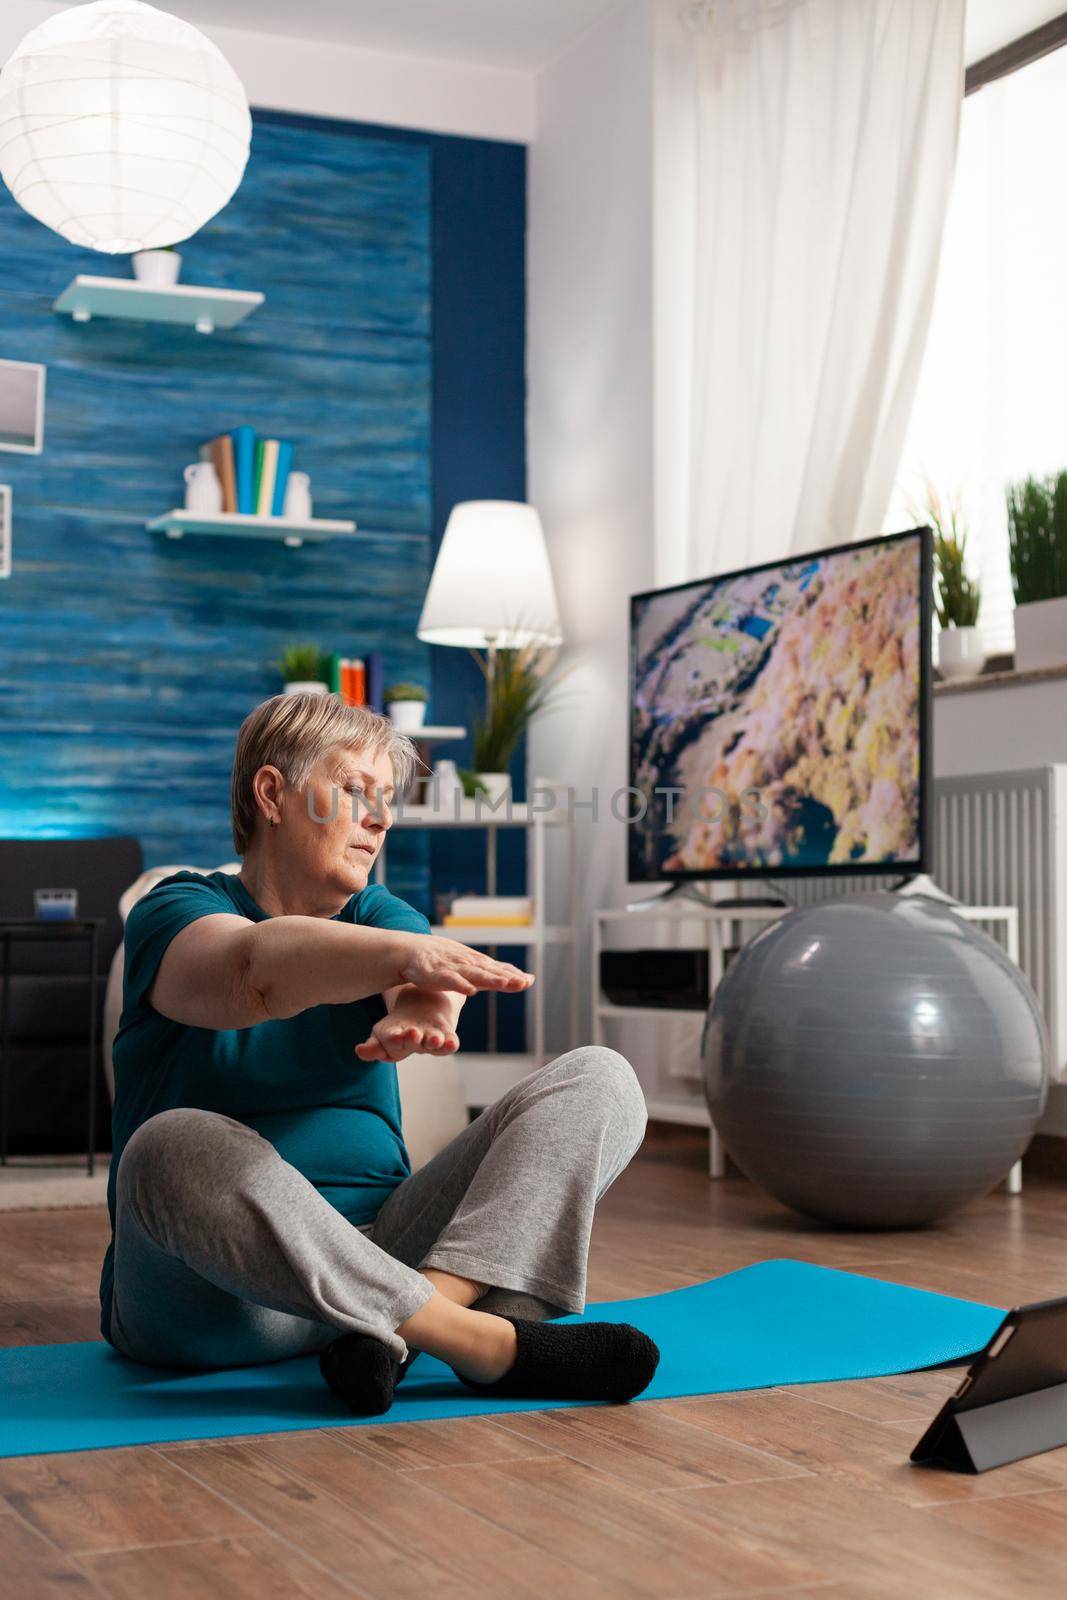 Retired senior woman in sportswear sitting on yoga mat watching fitness lesson on laptop practicing arm exercise slimming weight. Pensioner doing working at body flexibility during wellness workout